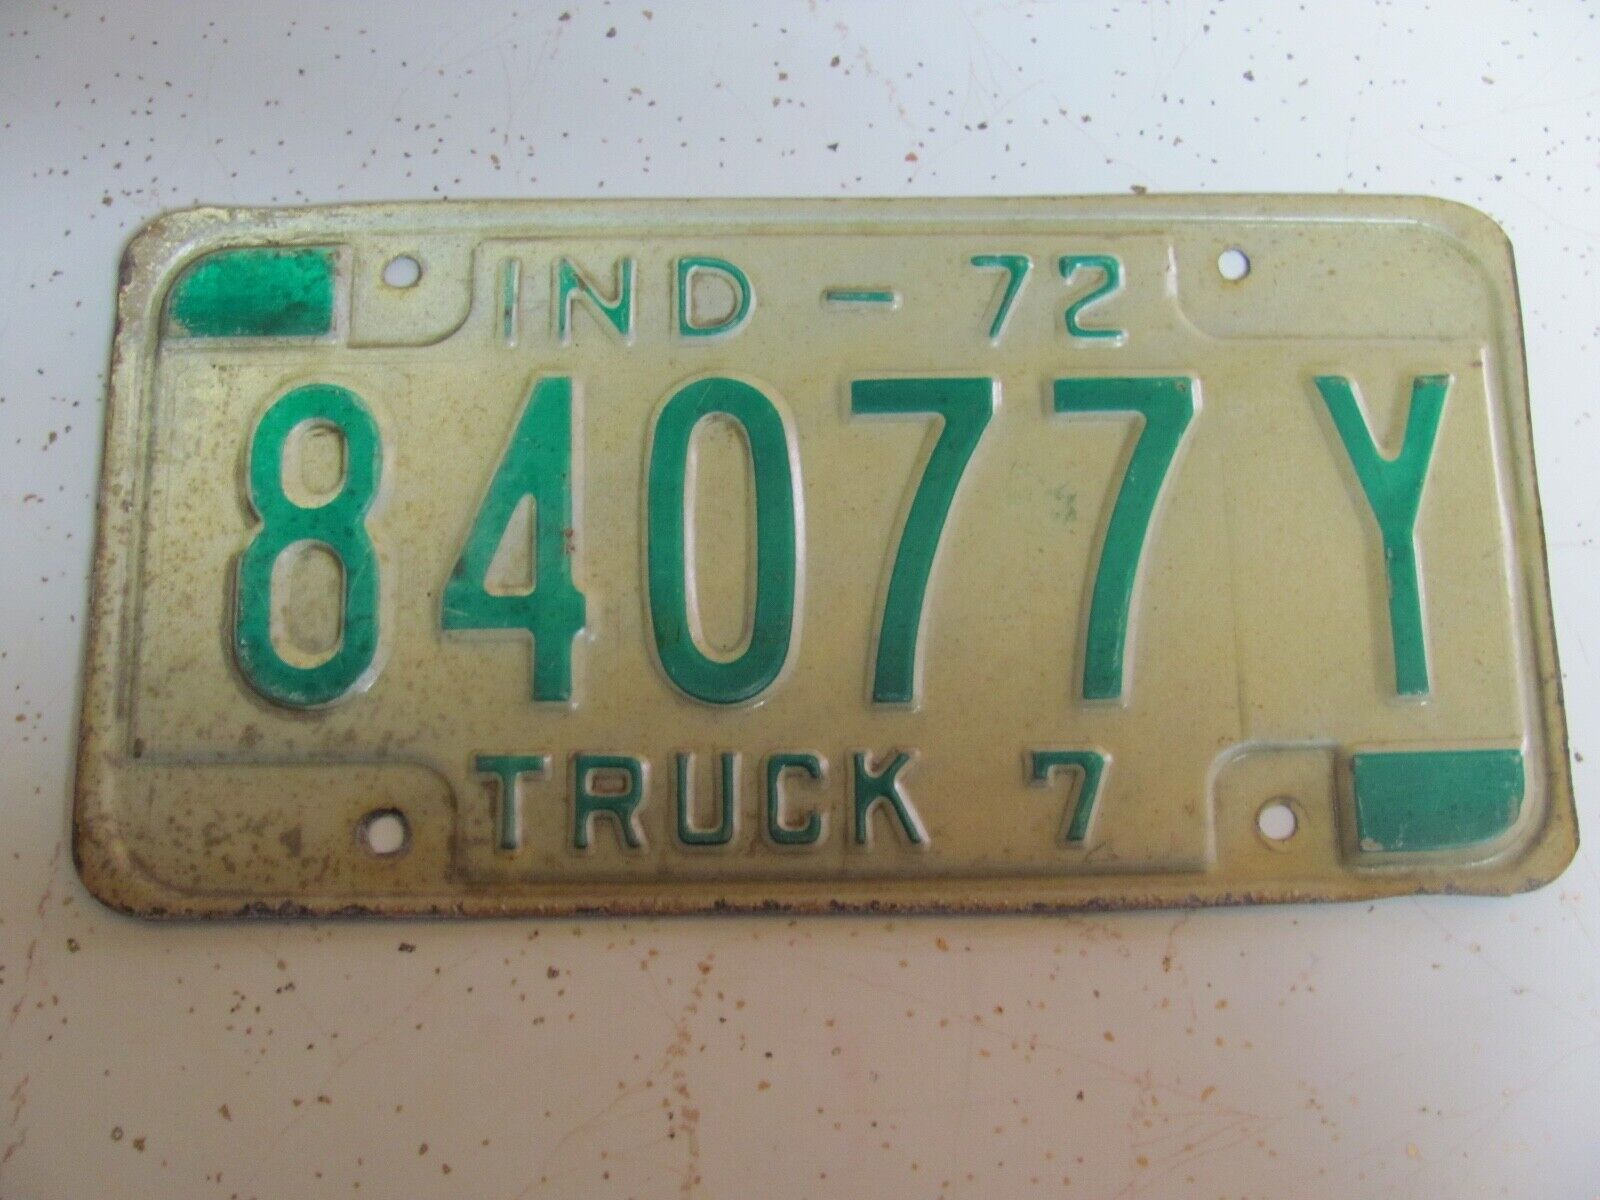 1972 TRUCK INDIANA LICENSE PLATE  SEE MY OTHER PLATES 84077Y